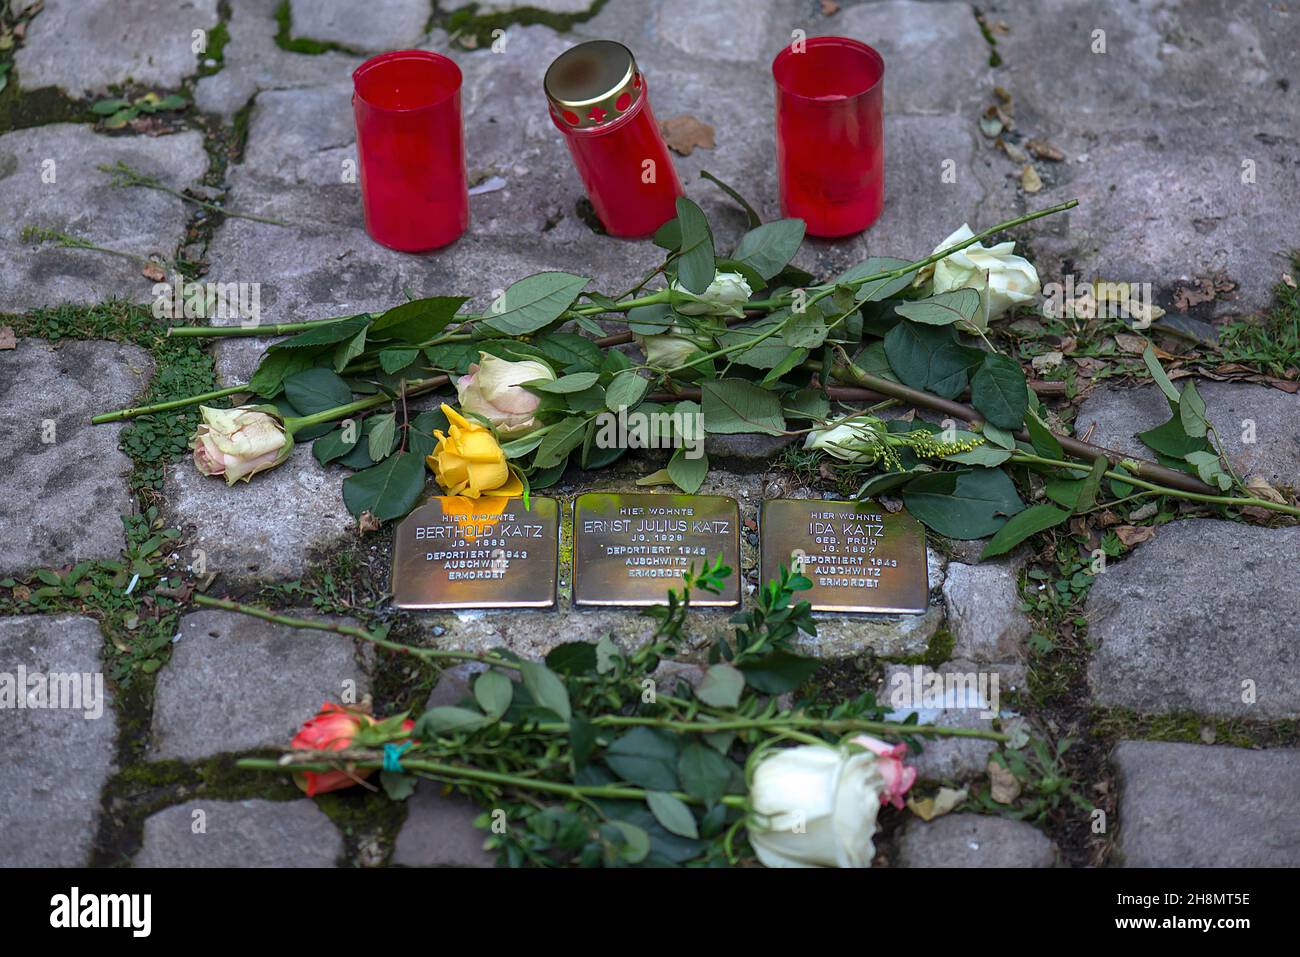 Roses and mourning candles at three memorial stones, commemoration of murdered Jewish fellow citizens by the Nazi regime in the Third Reich Stock Photo